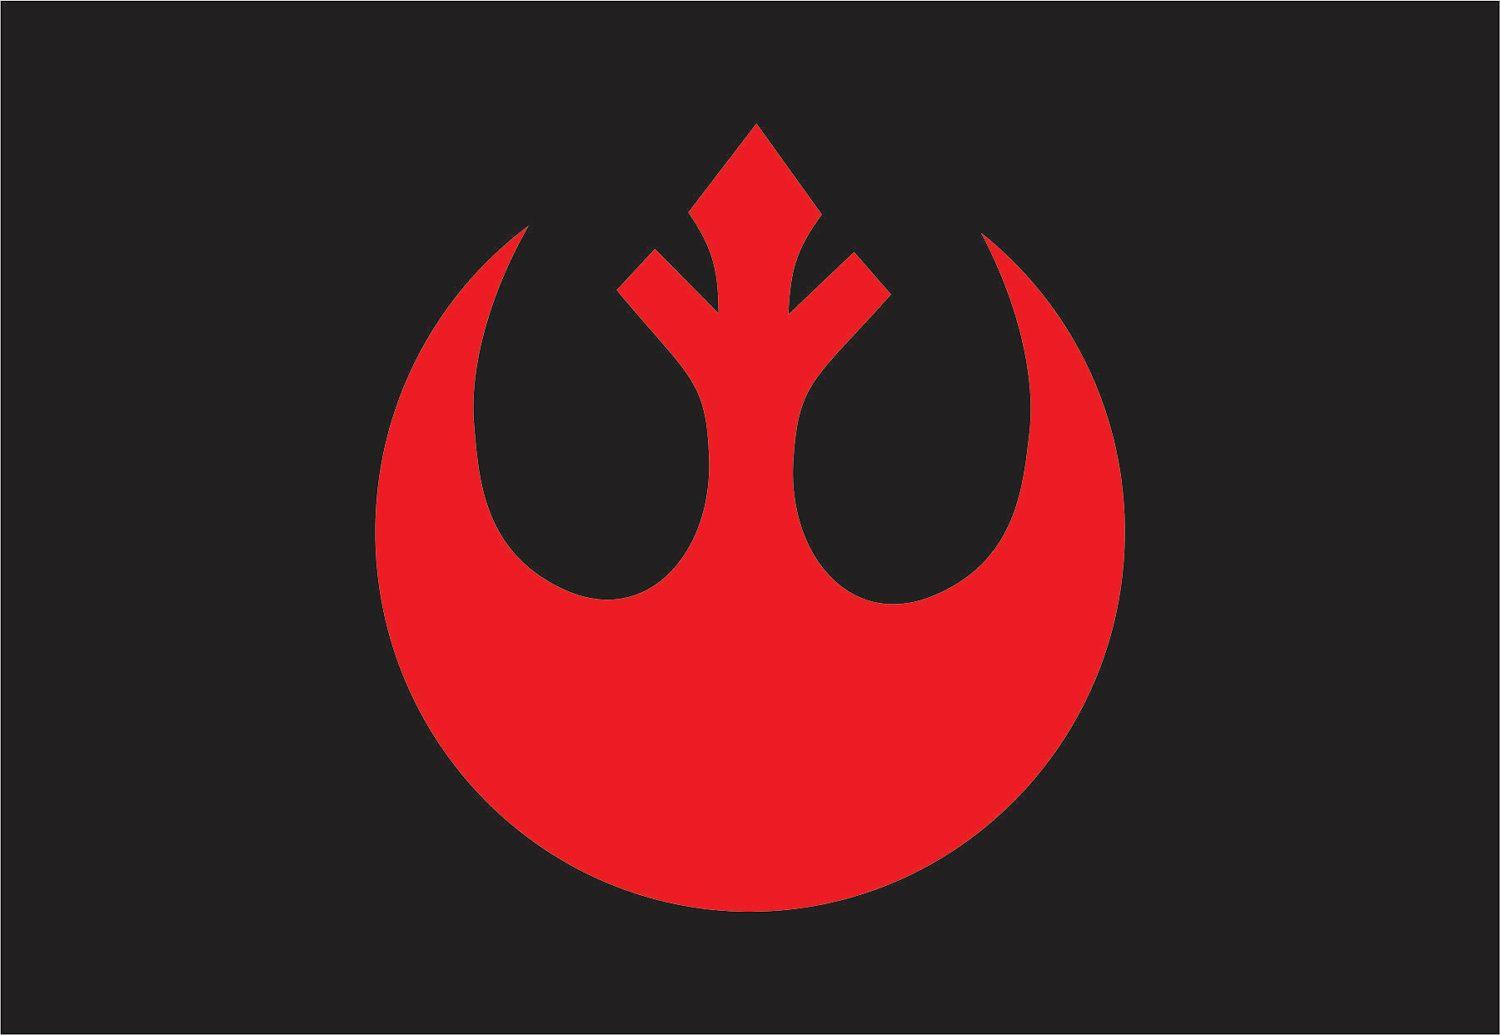 Rebel Logo - If you want a symbol to tell people you're a rebel, use this one